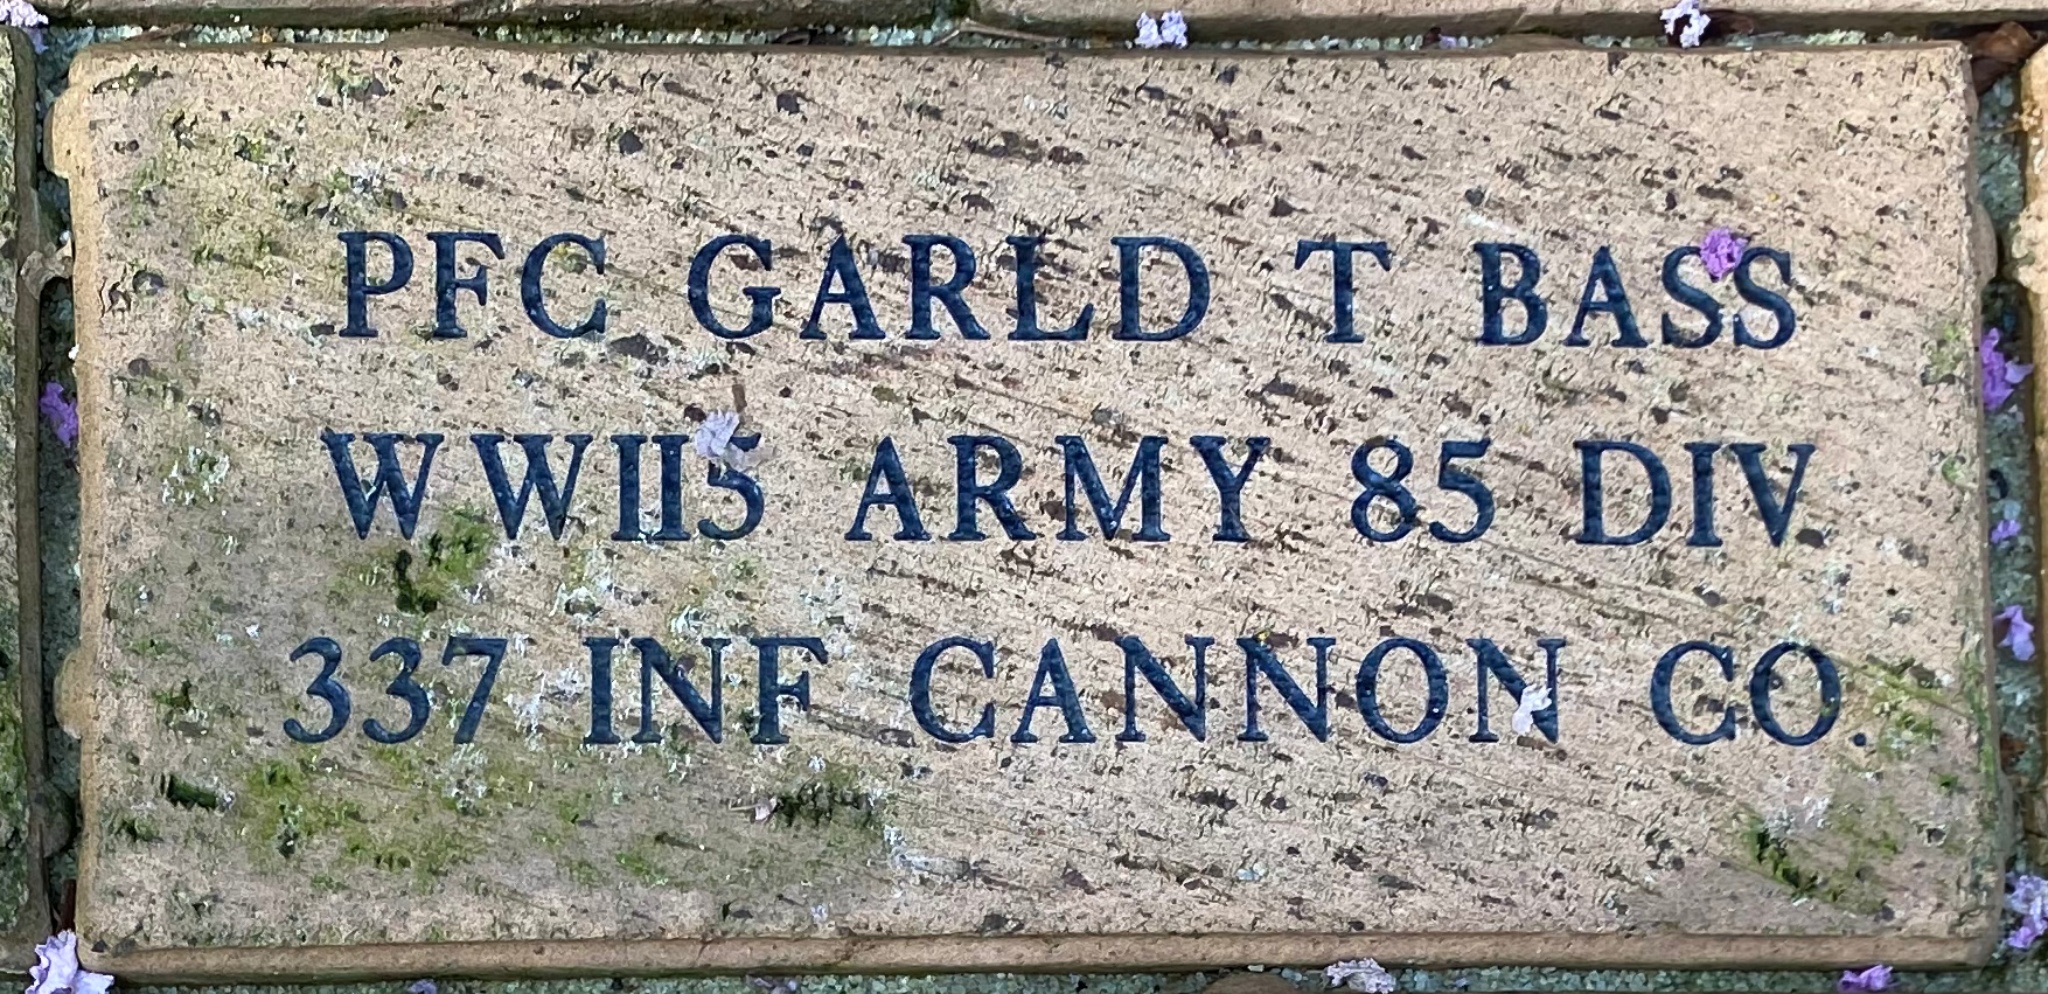 PFC GARLD T BASS WWII5 ARMY 85 DIV 337 INF CANNON CO